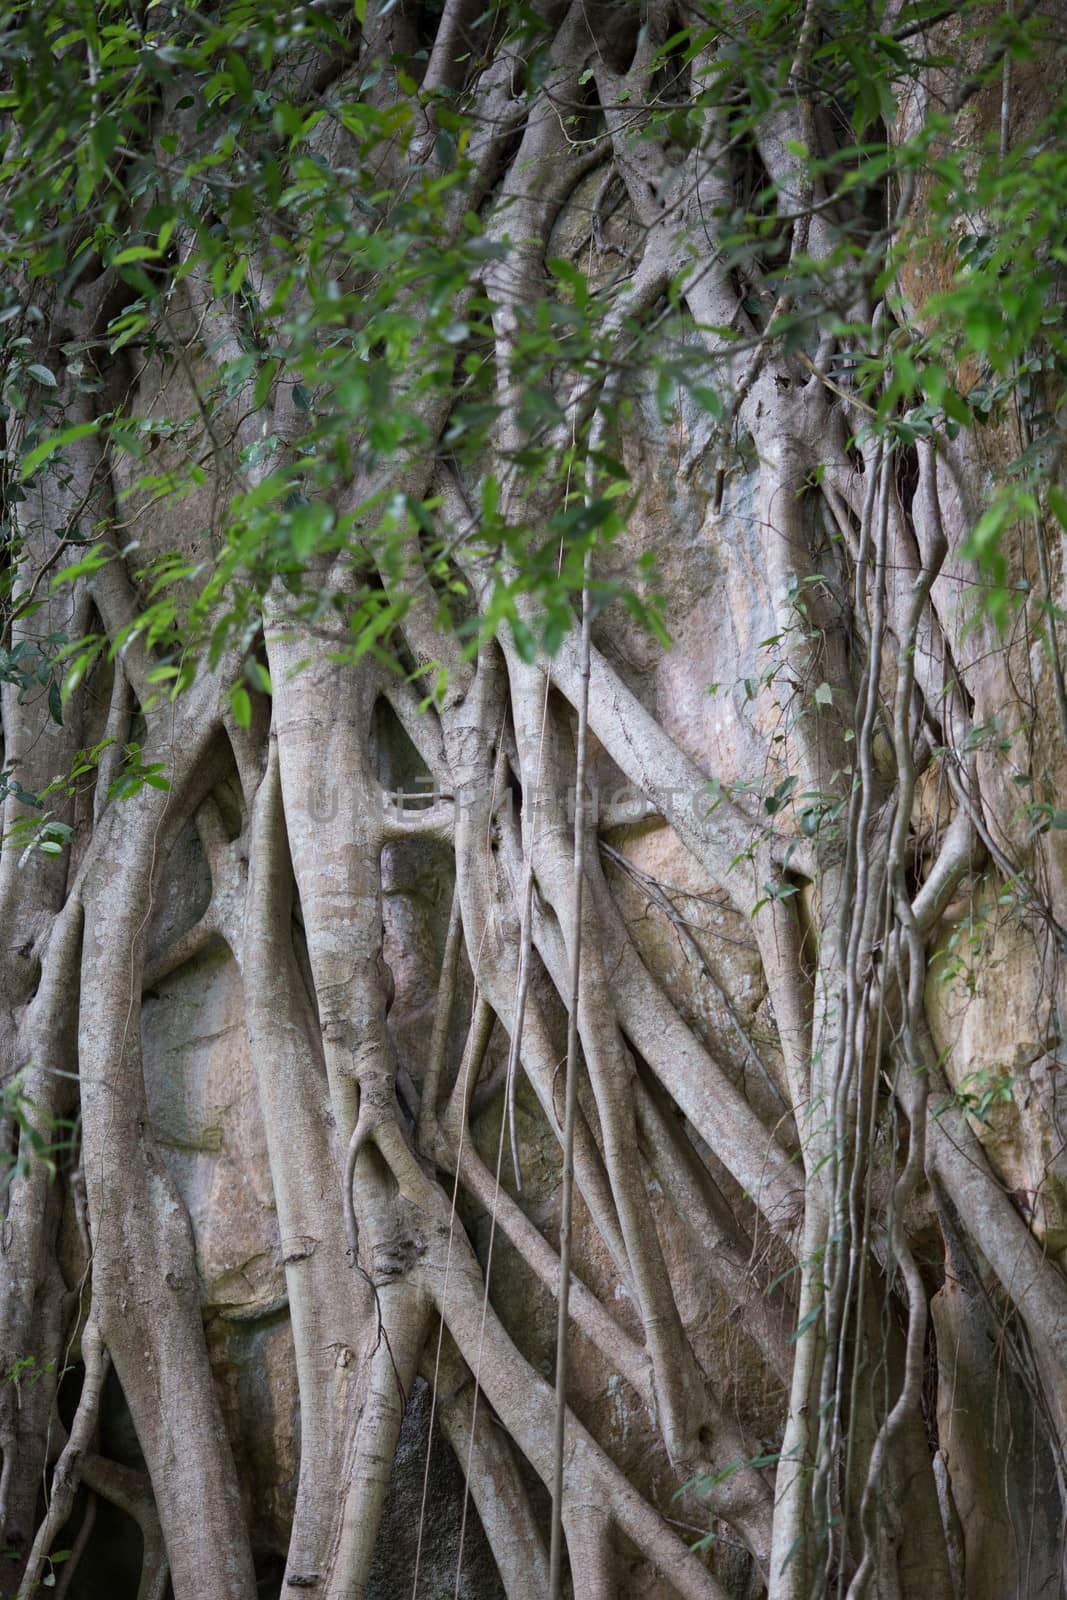 big tree roots and vine on mountain surface